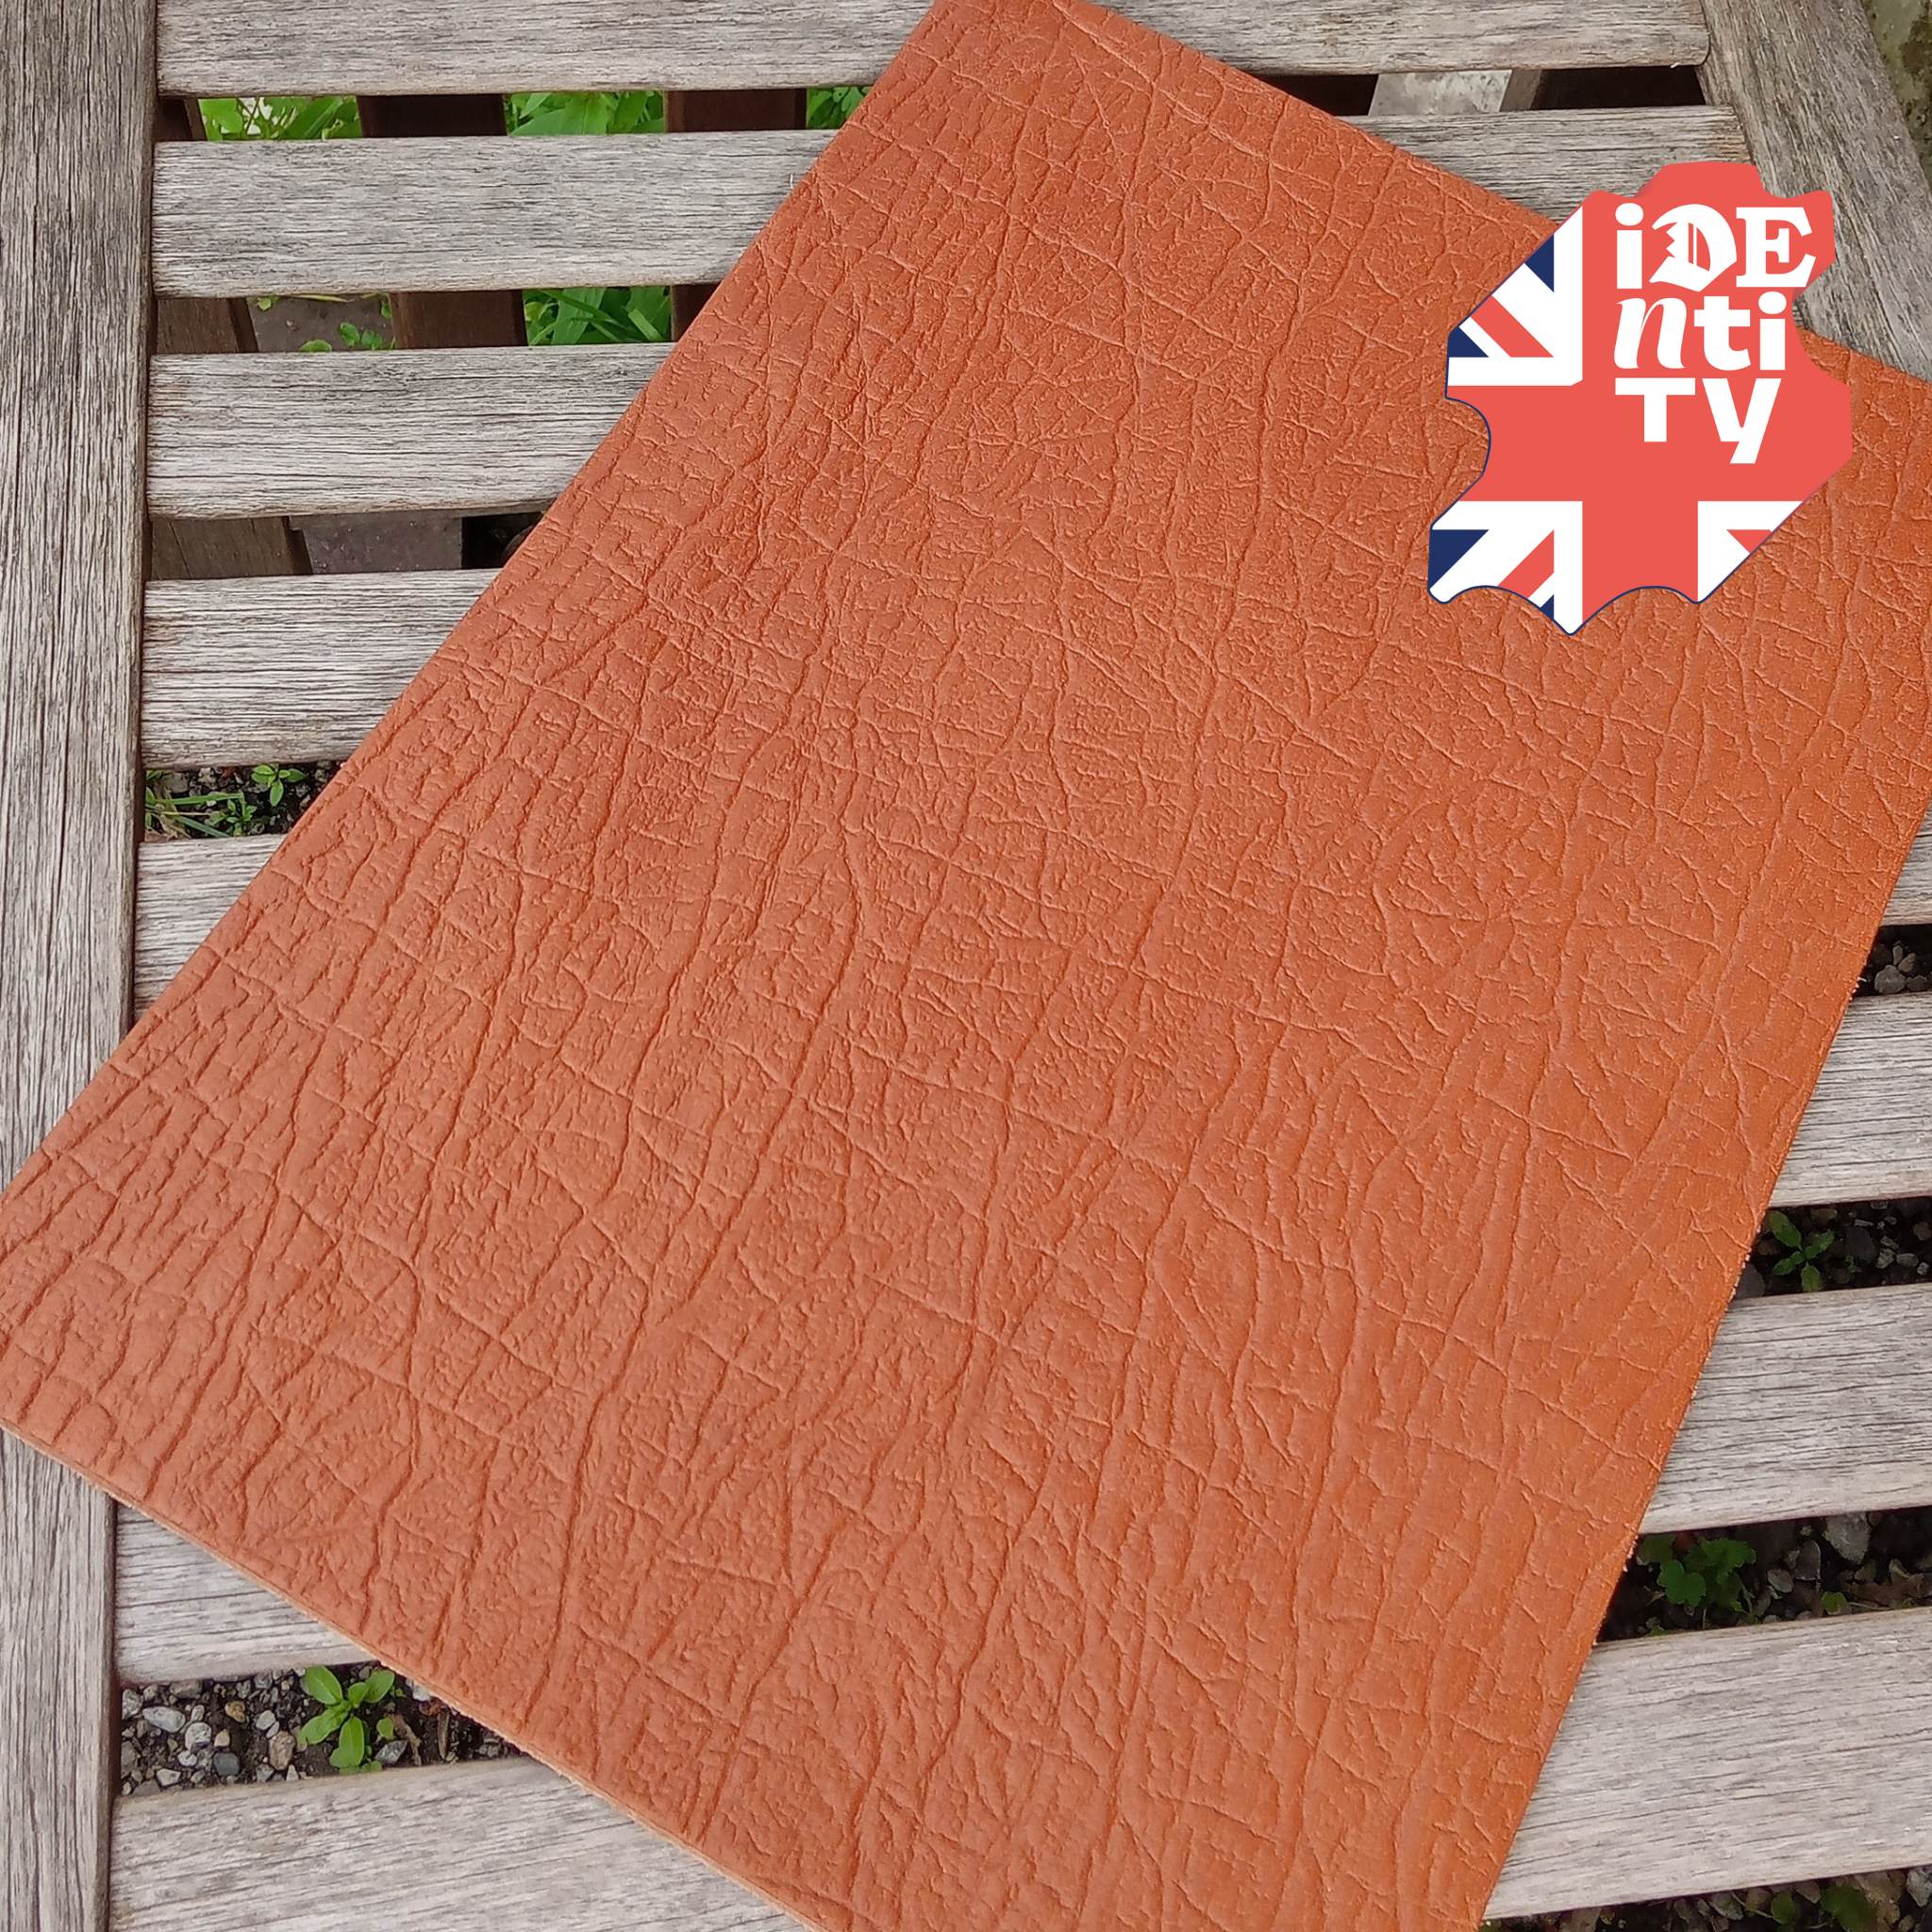 A3 cuts taken from the Heritage collection of leather sourced from the old Clayton's tannery in Chesterfield. Tan Coloured Textured Grain Leather - around 3-4mm   USES: knife/tool sheaths, arm-guards, straps, collars